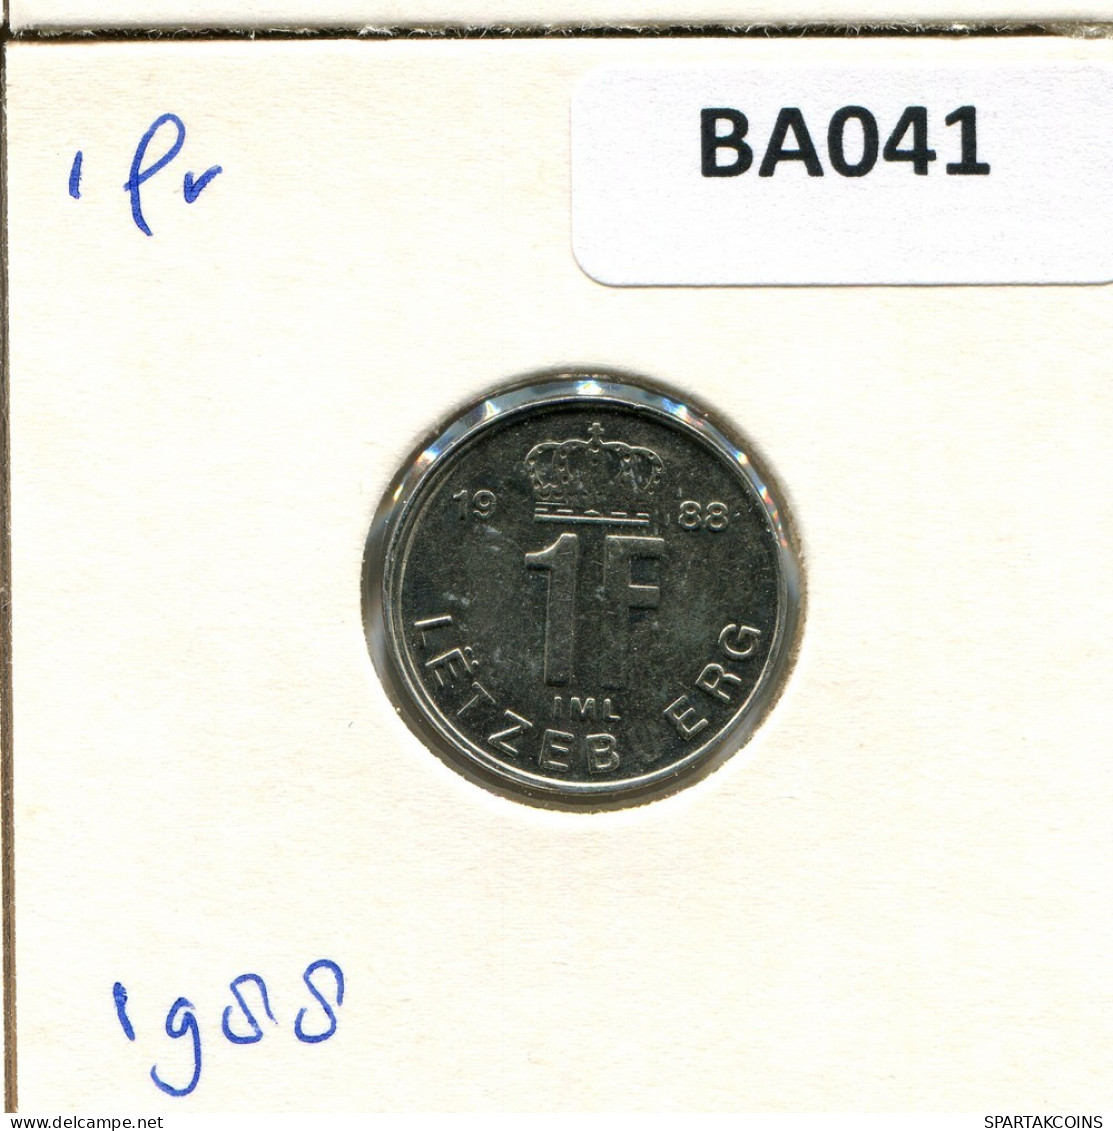 1 FRANC 1988 LUXEMBOURG Pièce #BA041.F.A - Luxembourg